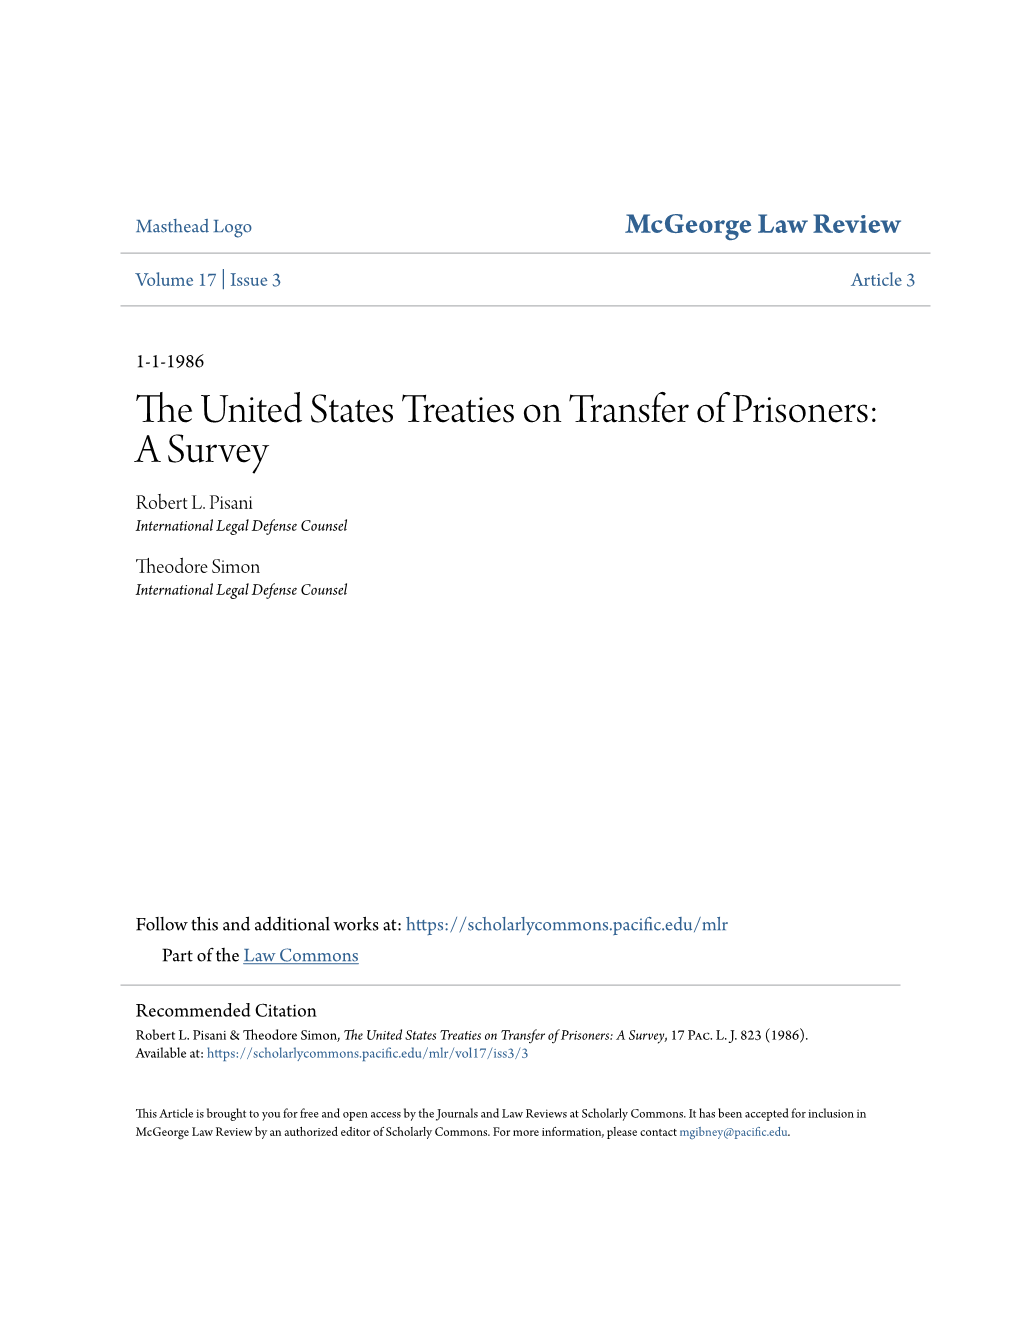 The United States Treaties on Transfer of Prisoners: a Survey, 17 Pac